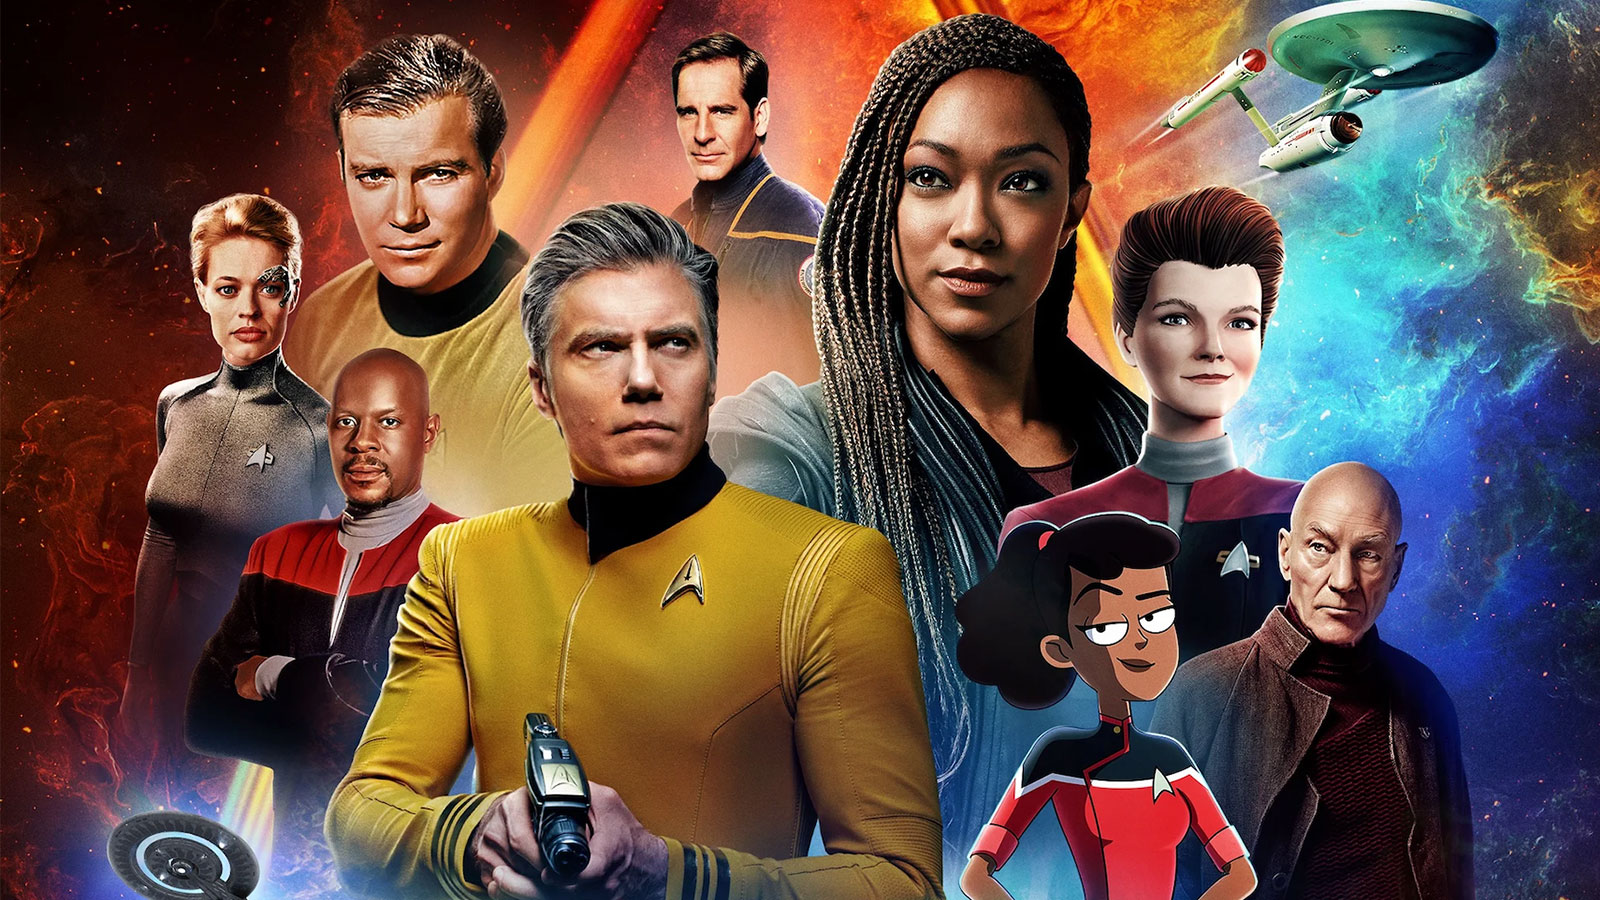 A collage of images representing 50+ years of "Star Trek" on television.